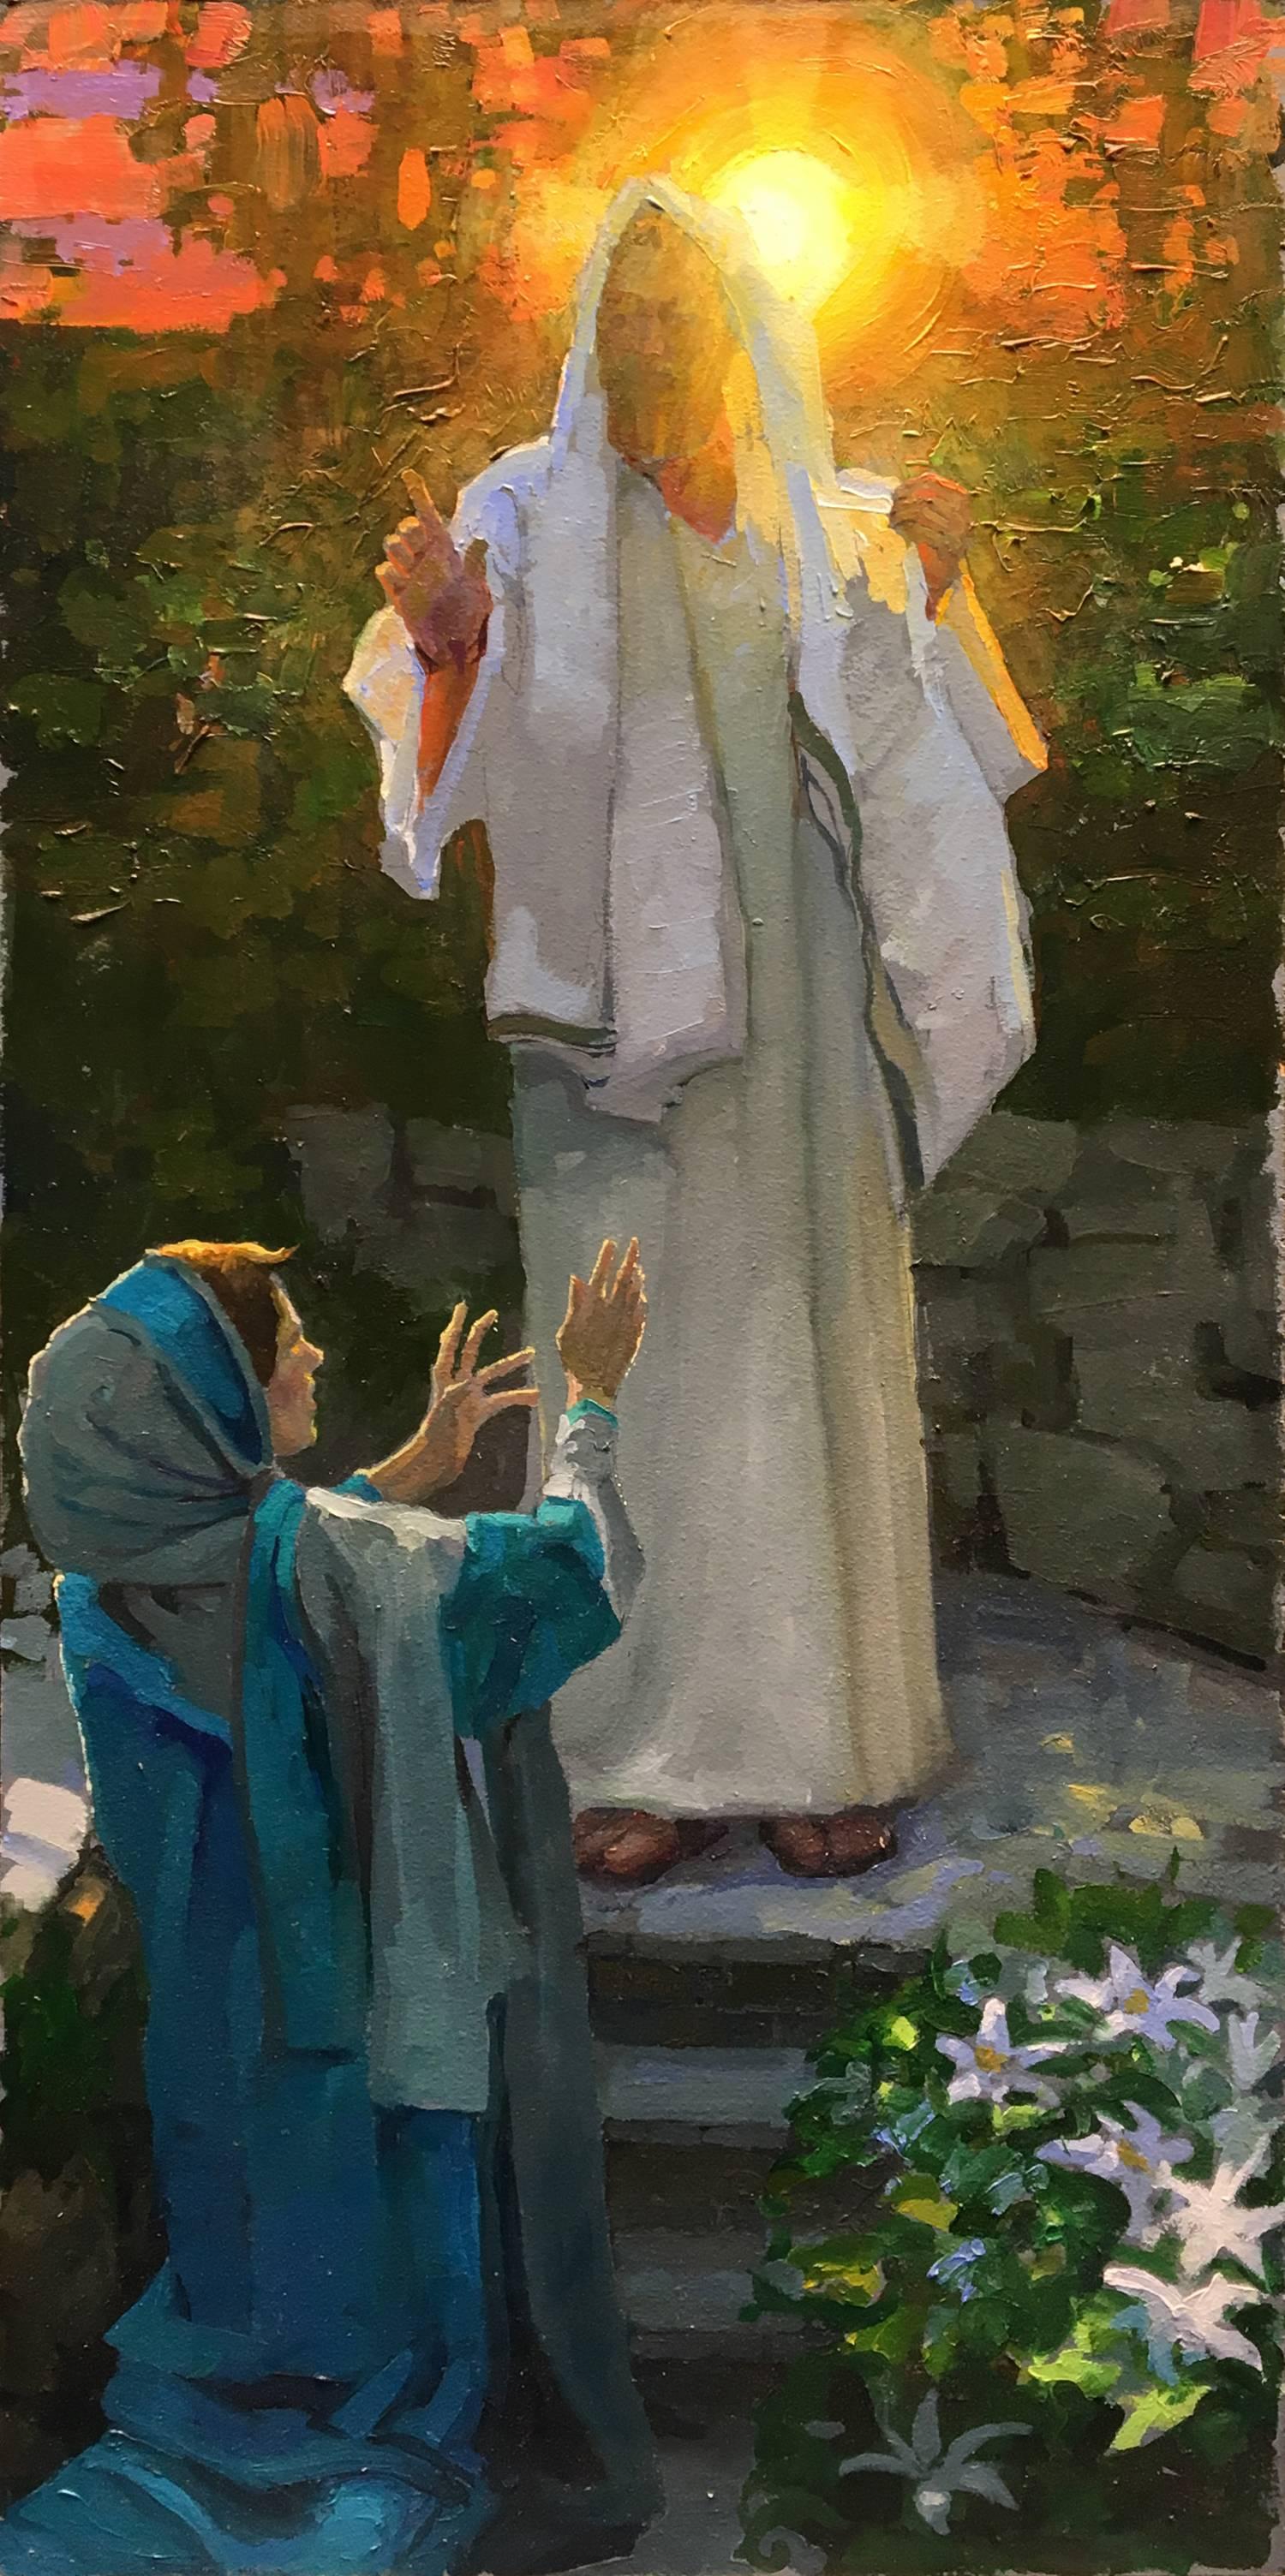 Study for the Resurrection - Painting by Peter Adams